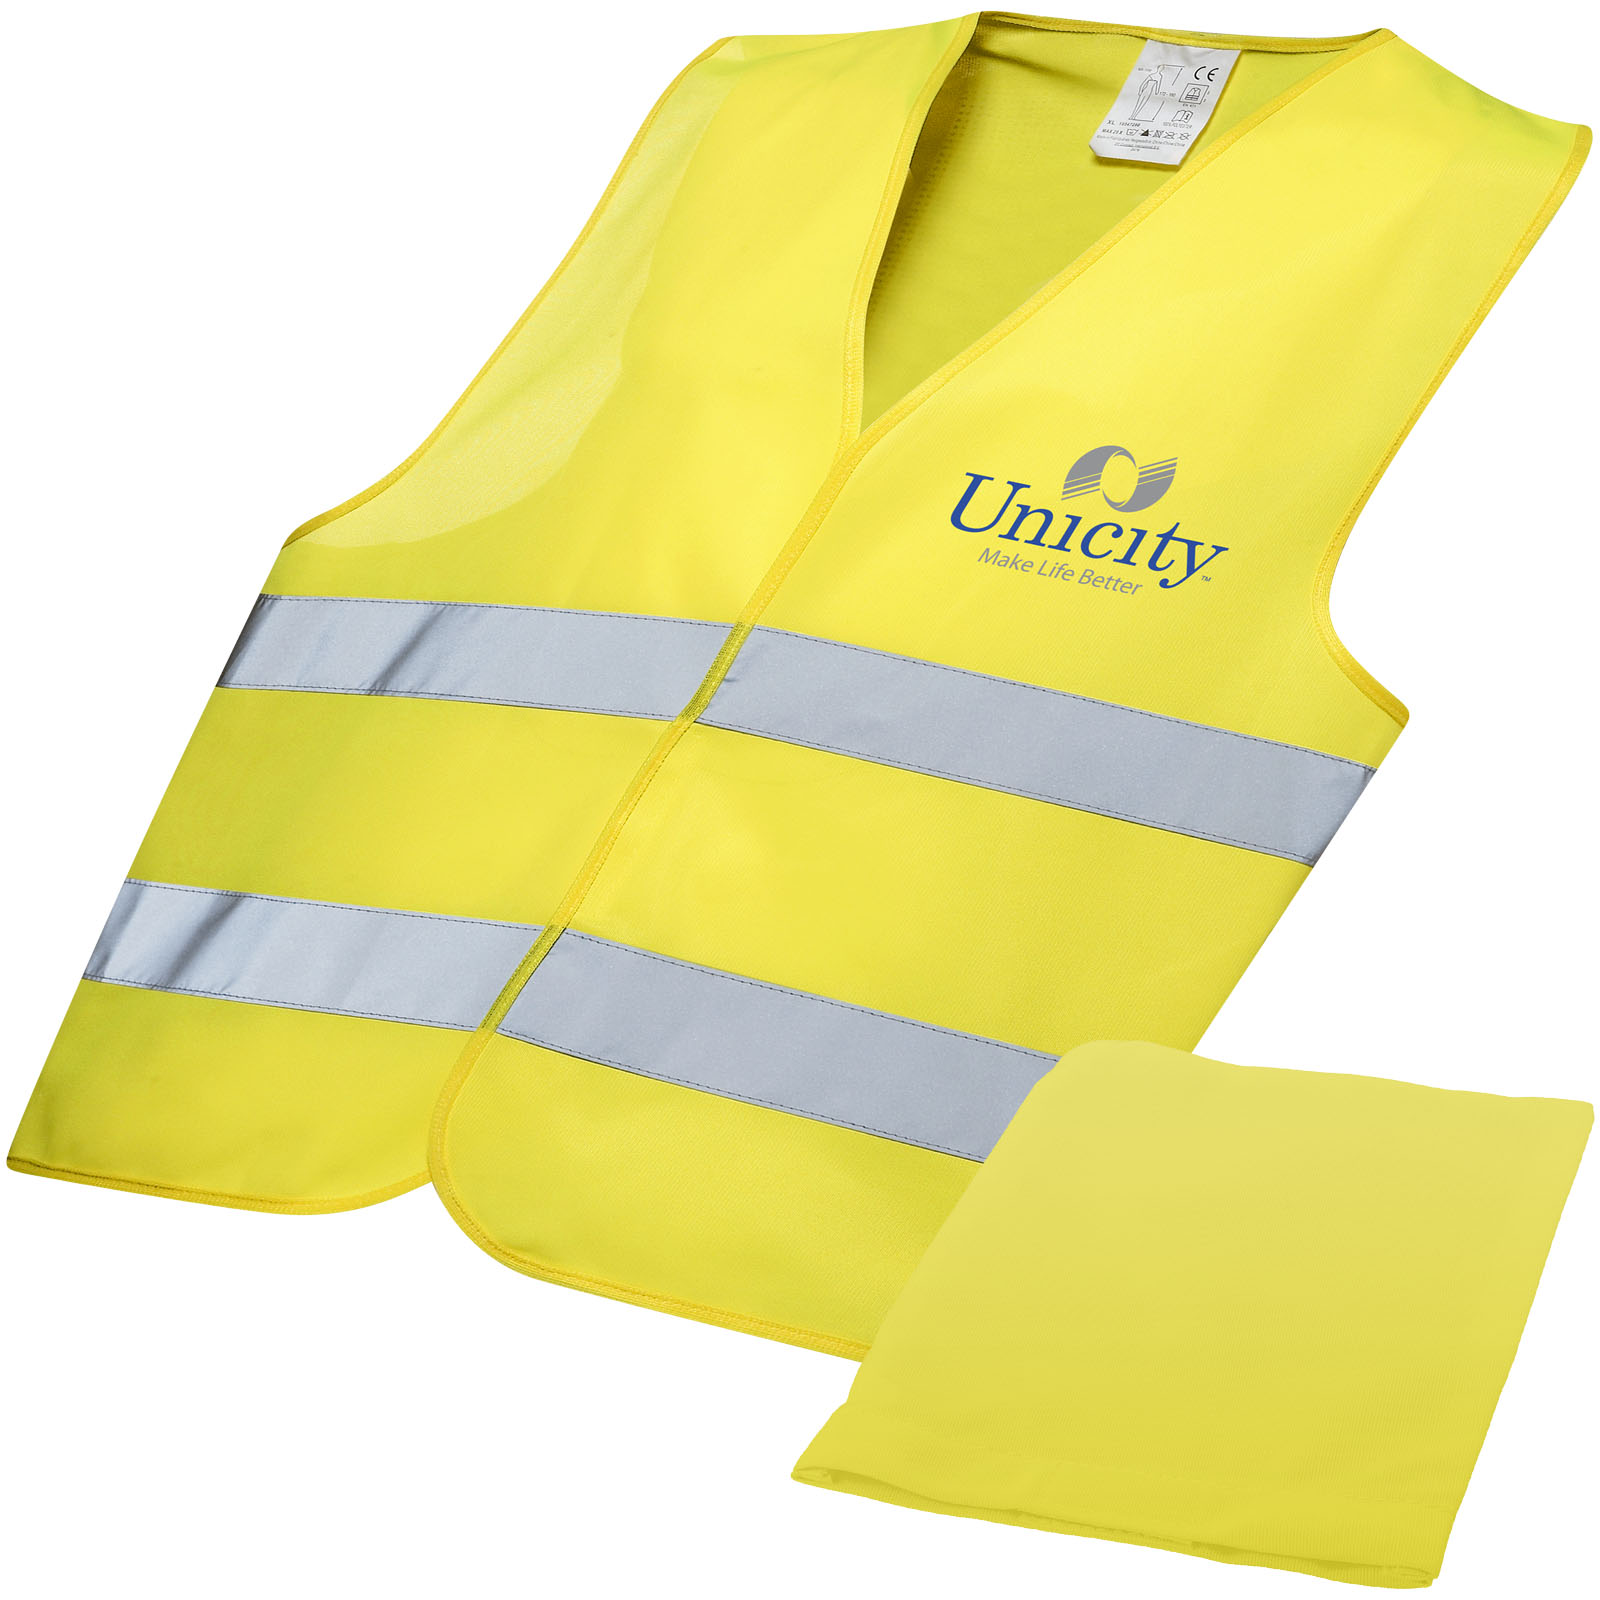 Advertising Safety Vests - RFX™ Watch-out XL safety vest in pouch for professional use